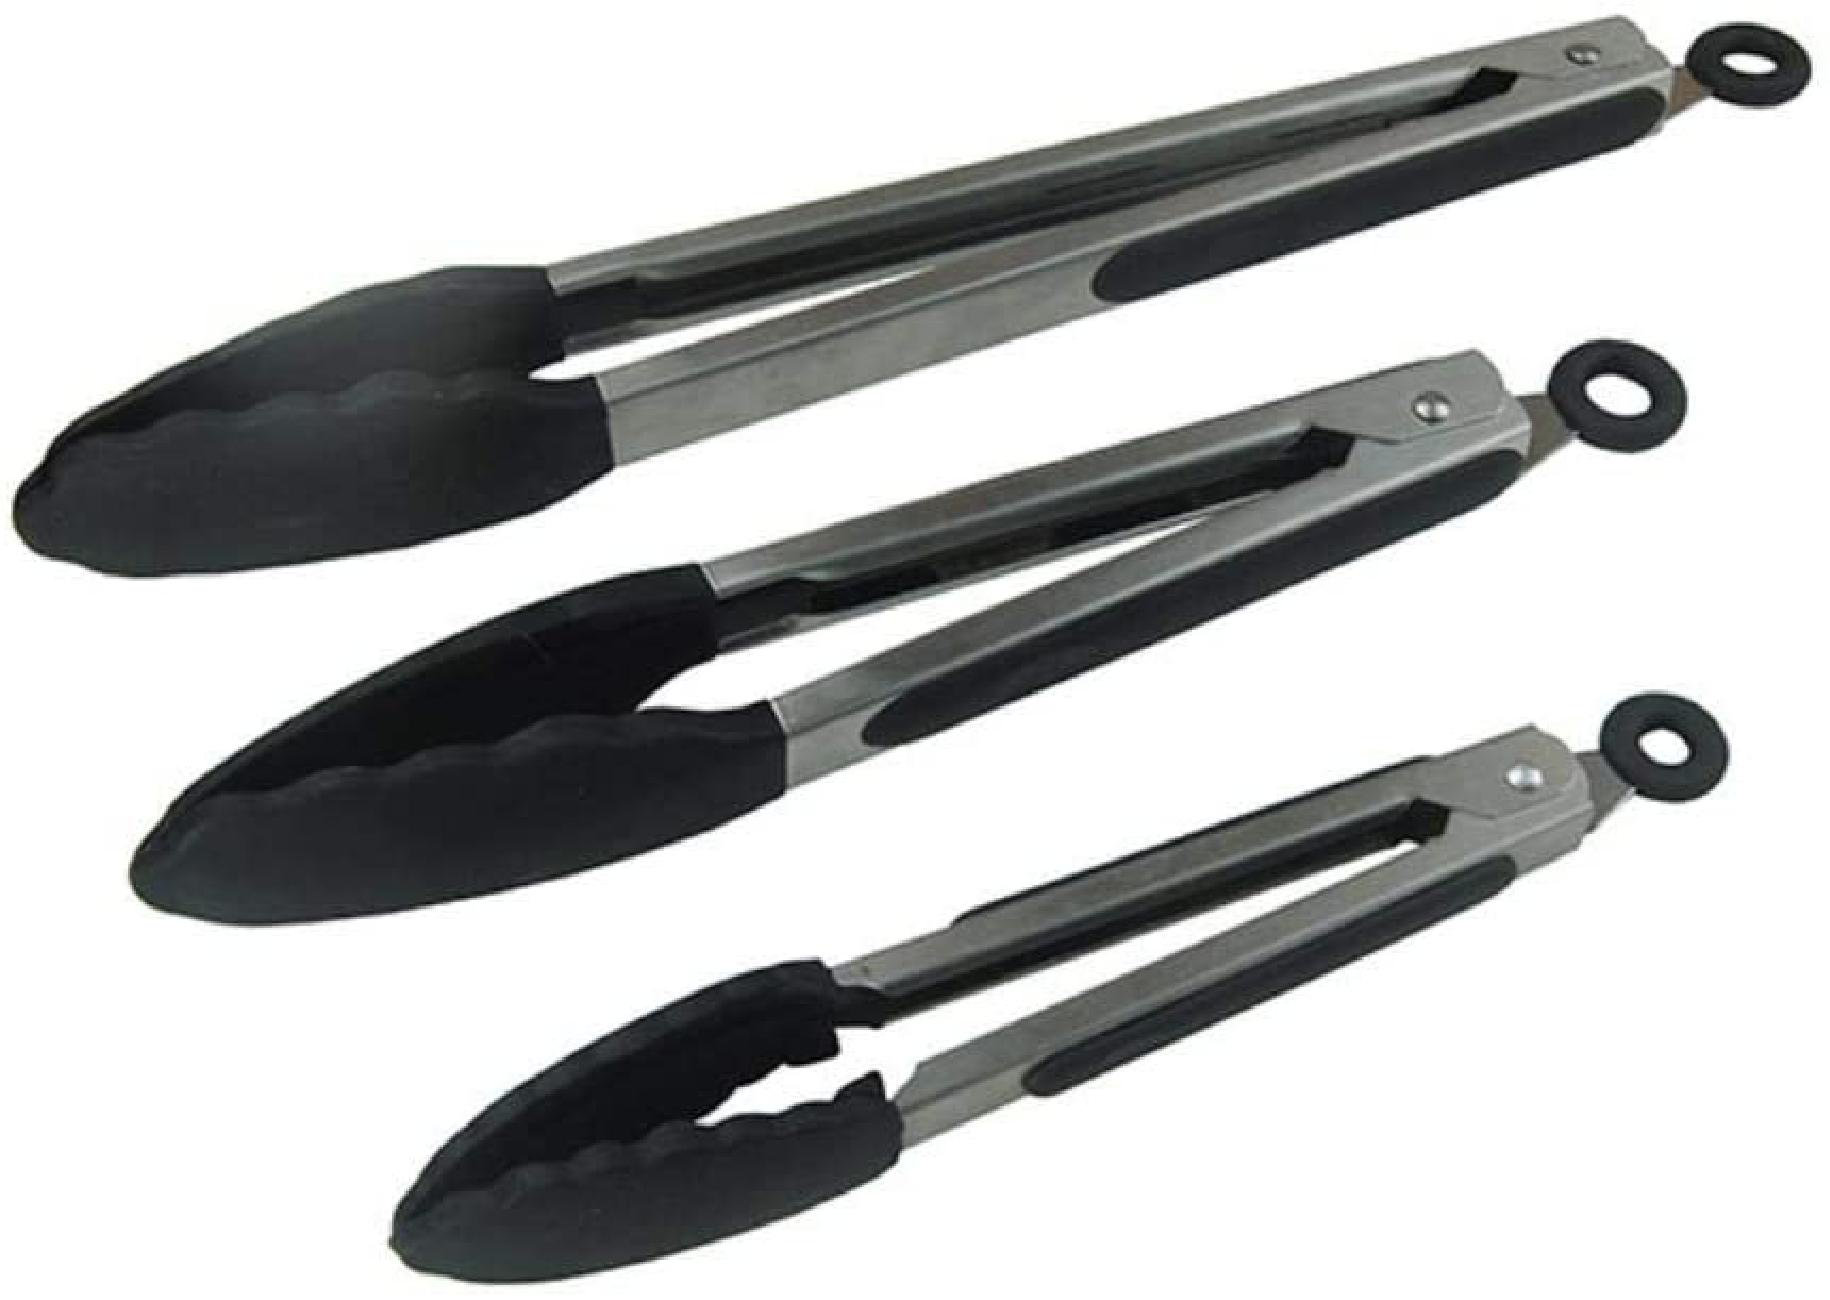 3 x Pack Silicon Mini Tong Kitchen Food Cooking Handling Non stick 7"